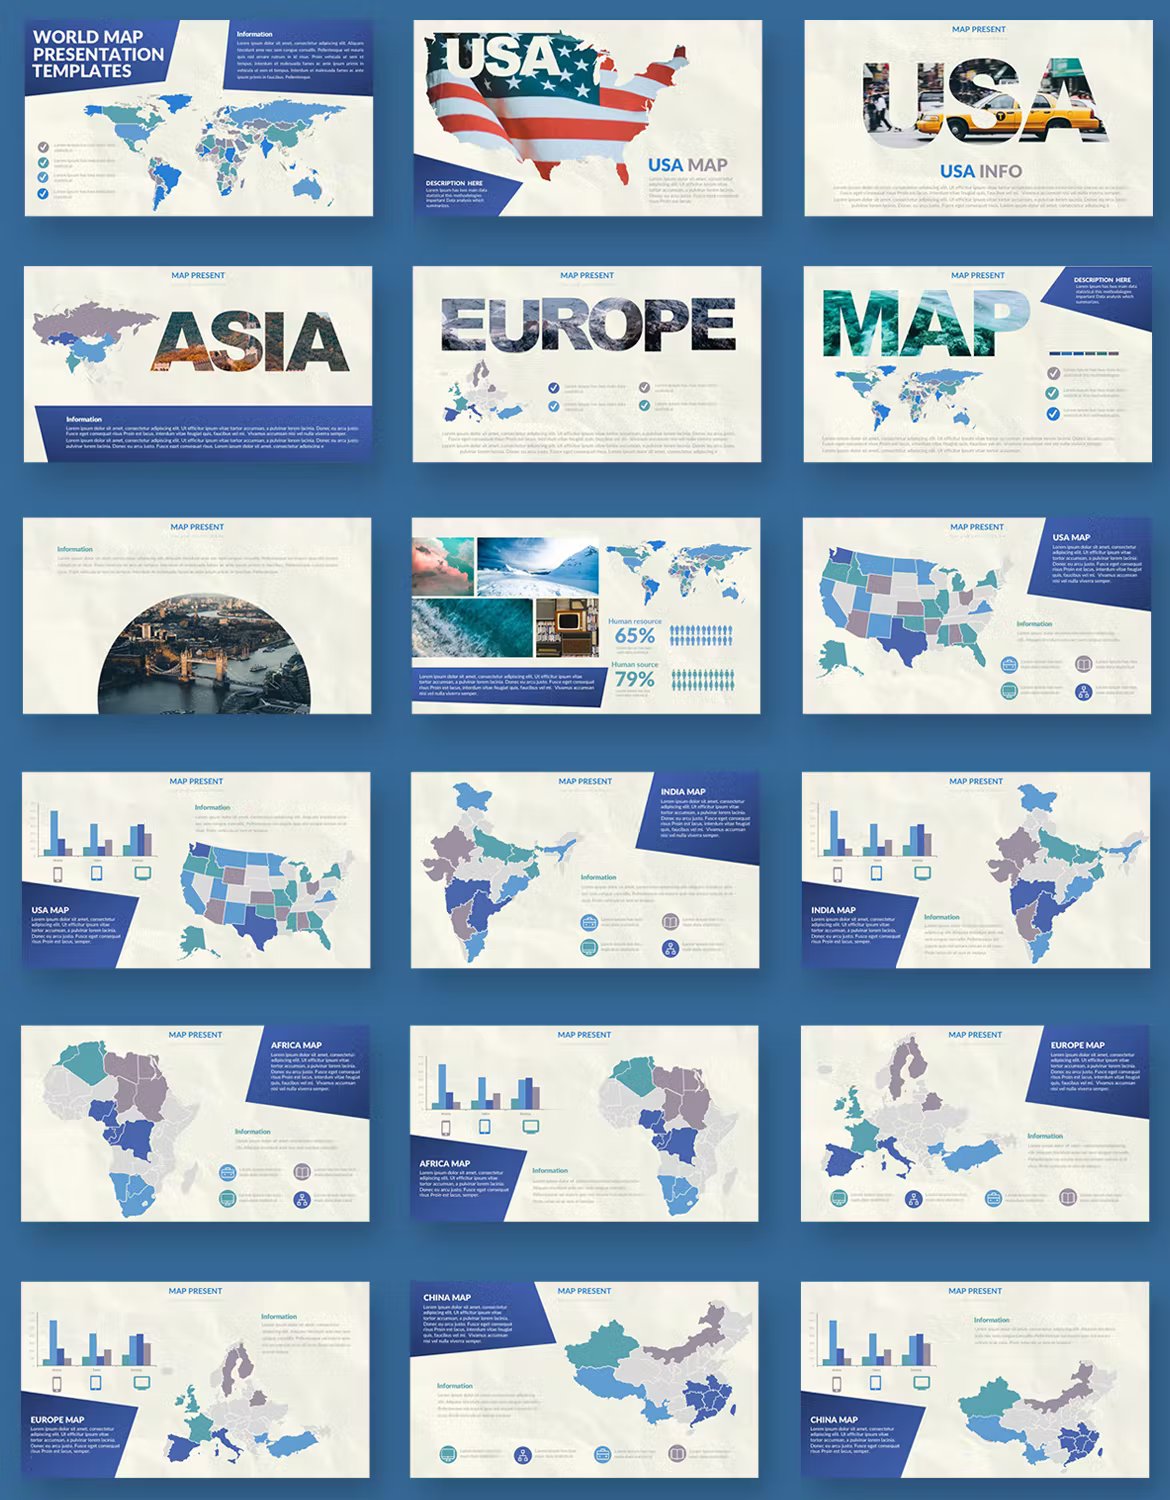 A set of 18 different assign powerpoint templates in blue, gray, green and white on a blue background.